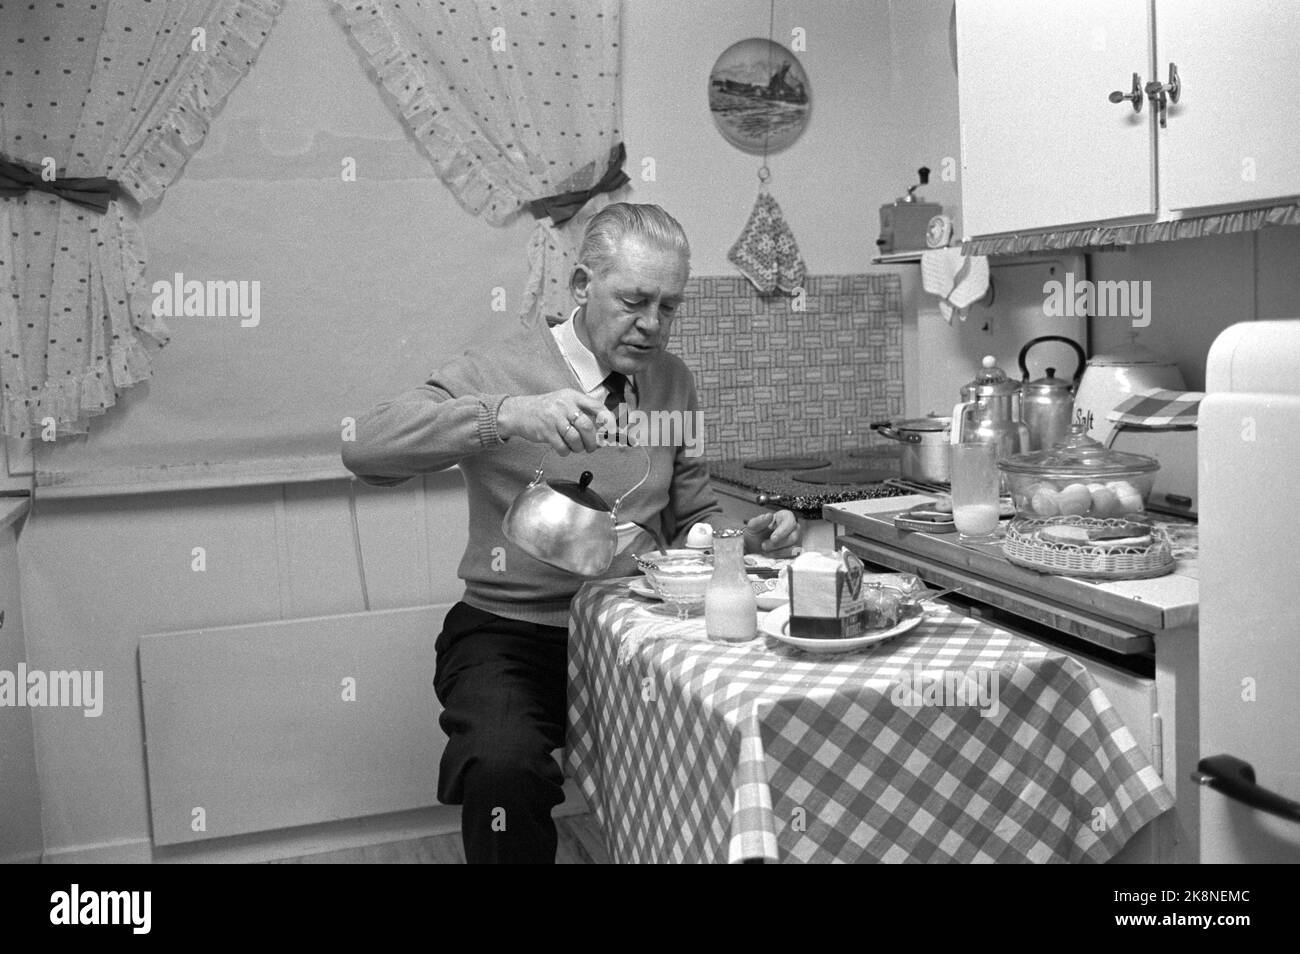 Oslo - Fredrikstad 1962. Long night's journey to work. 'While most of the population sleeps, the new' pariacast 'must out of the duvets. They have from two to four hours of travel to work every day.' Report on commuting from Fredrikstad. Here P. Mosgaard who consumes breakfast. Photo: Ivar Aaserud / Current / NTB Stock Photo